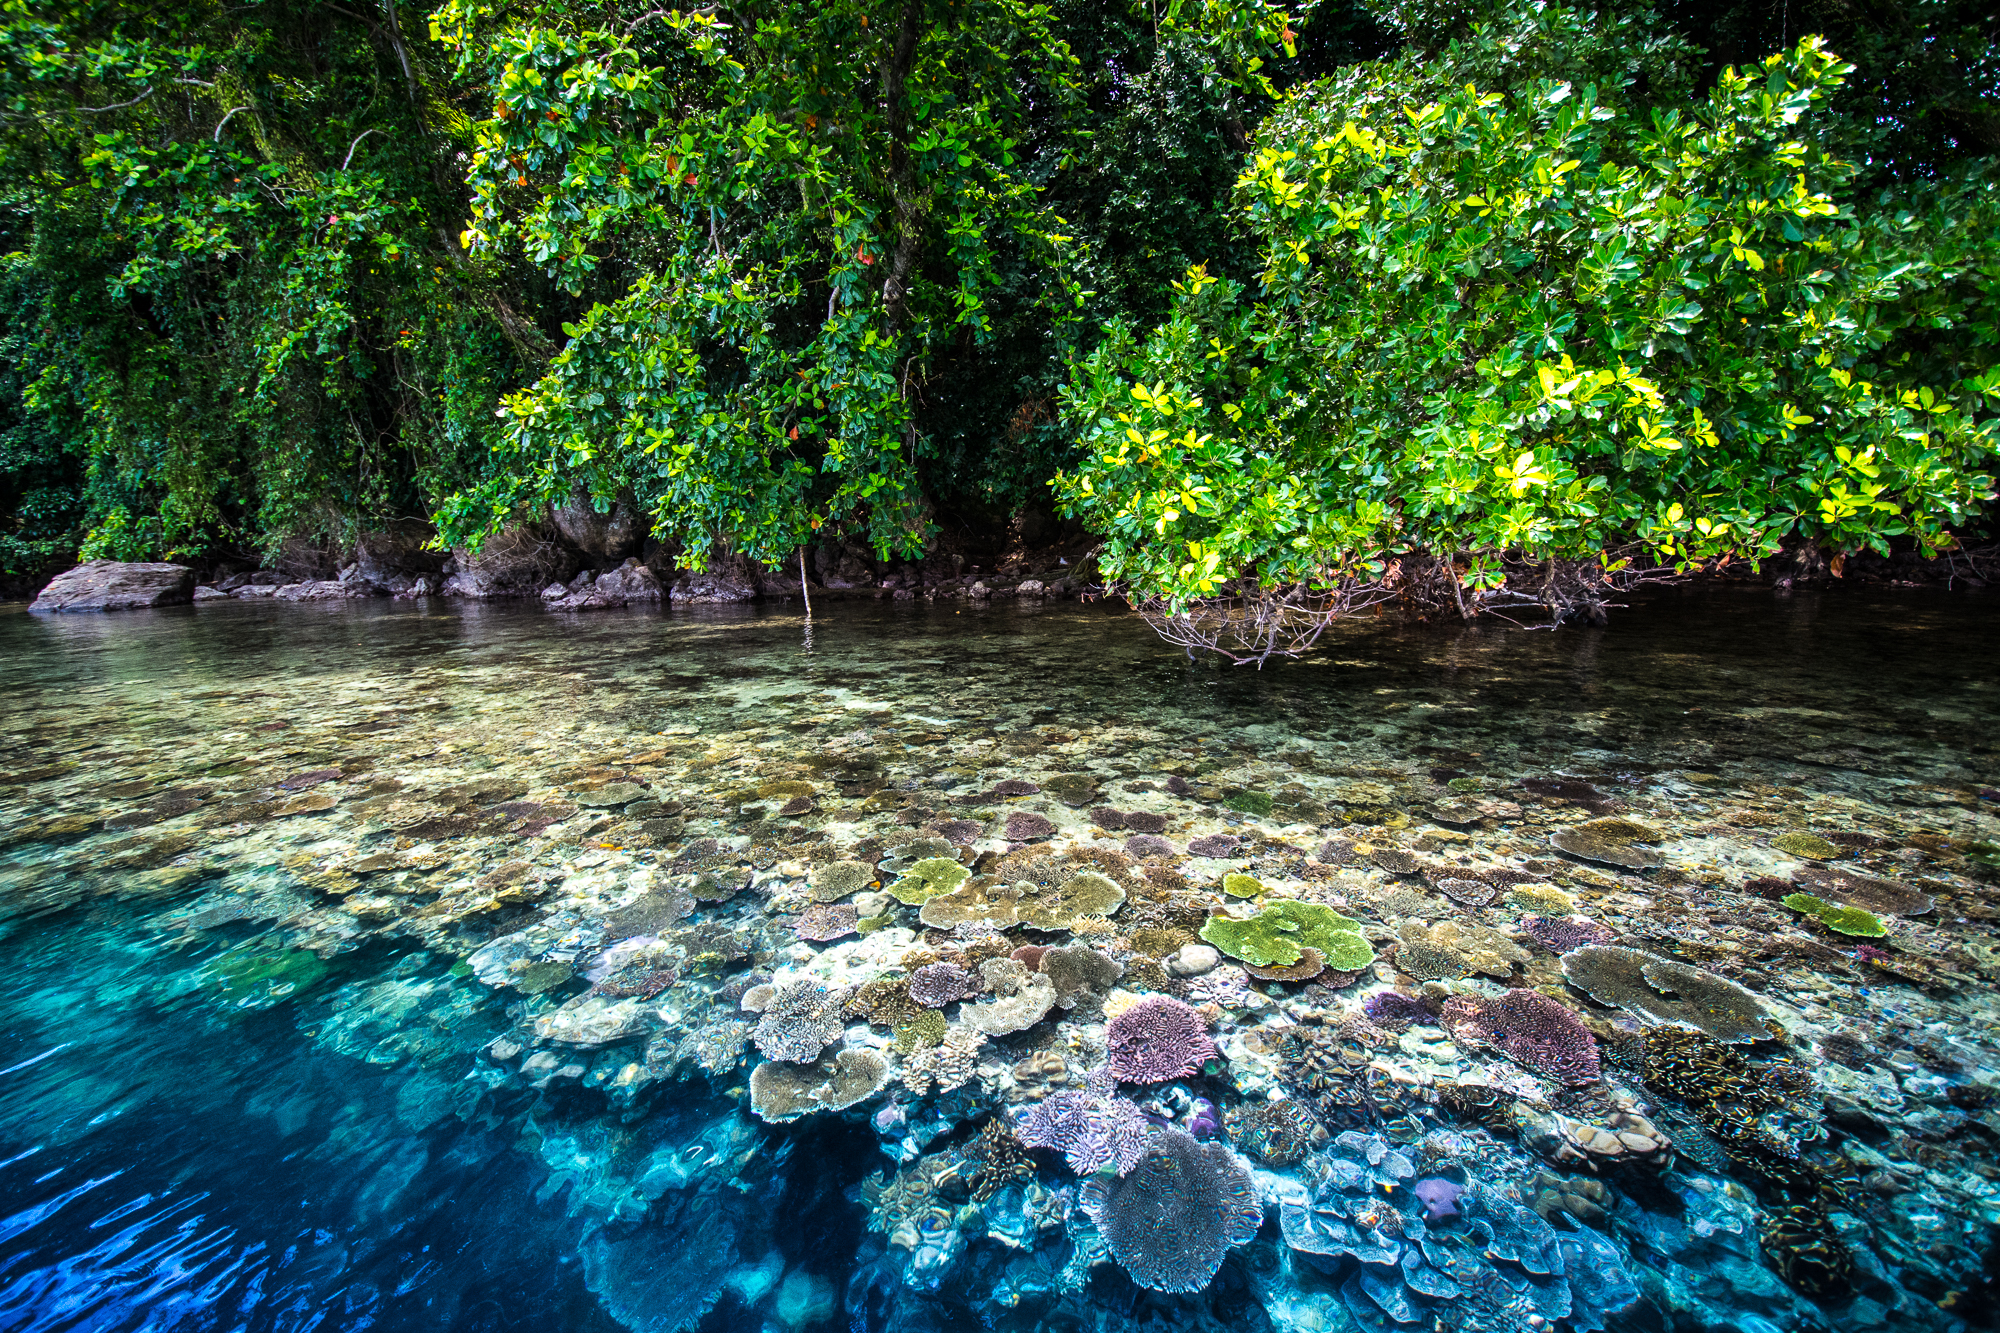 A split shot showing a blue and purple coral reef under the water as well as mangrove trees above the surface.